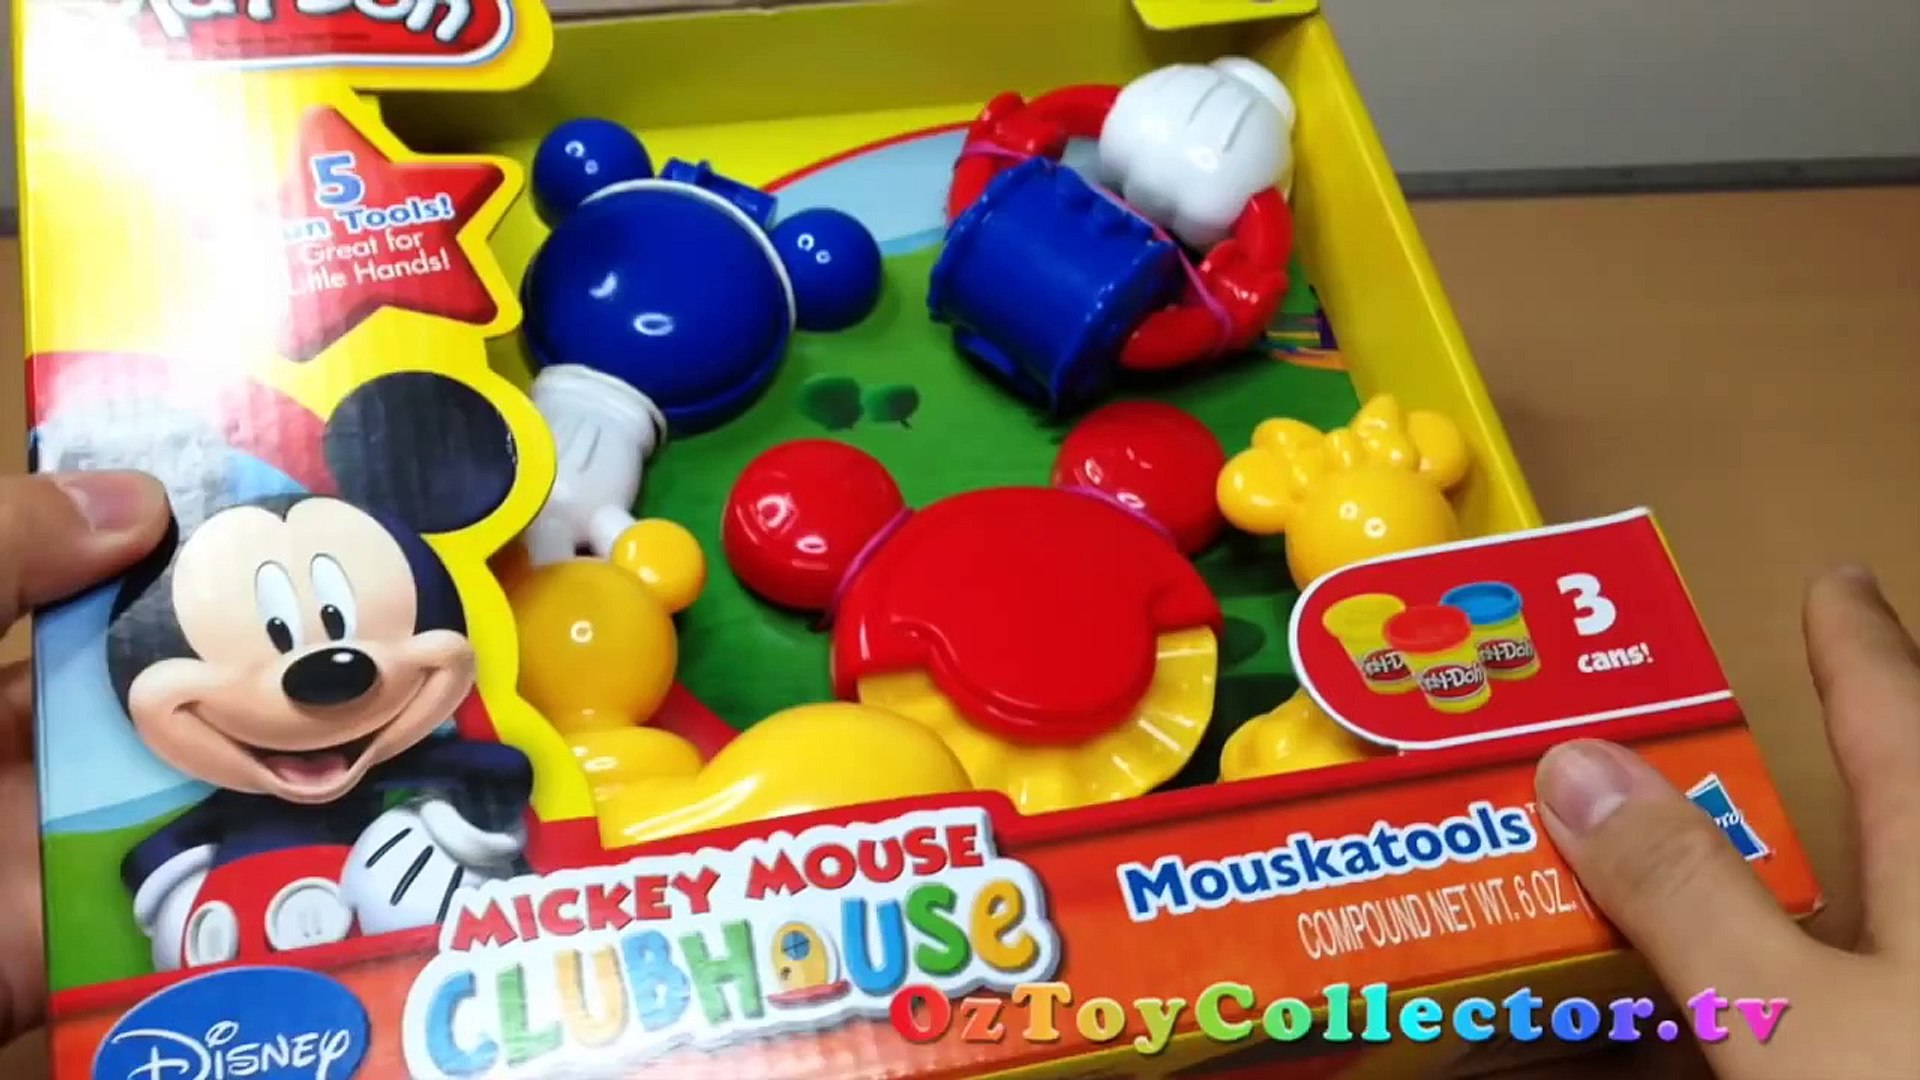 Play Doh Mickey Mouse Clubhouse Disney Junior Channel Disney playdoh kit -  Vidéo Dailymotion